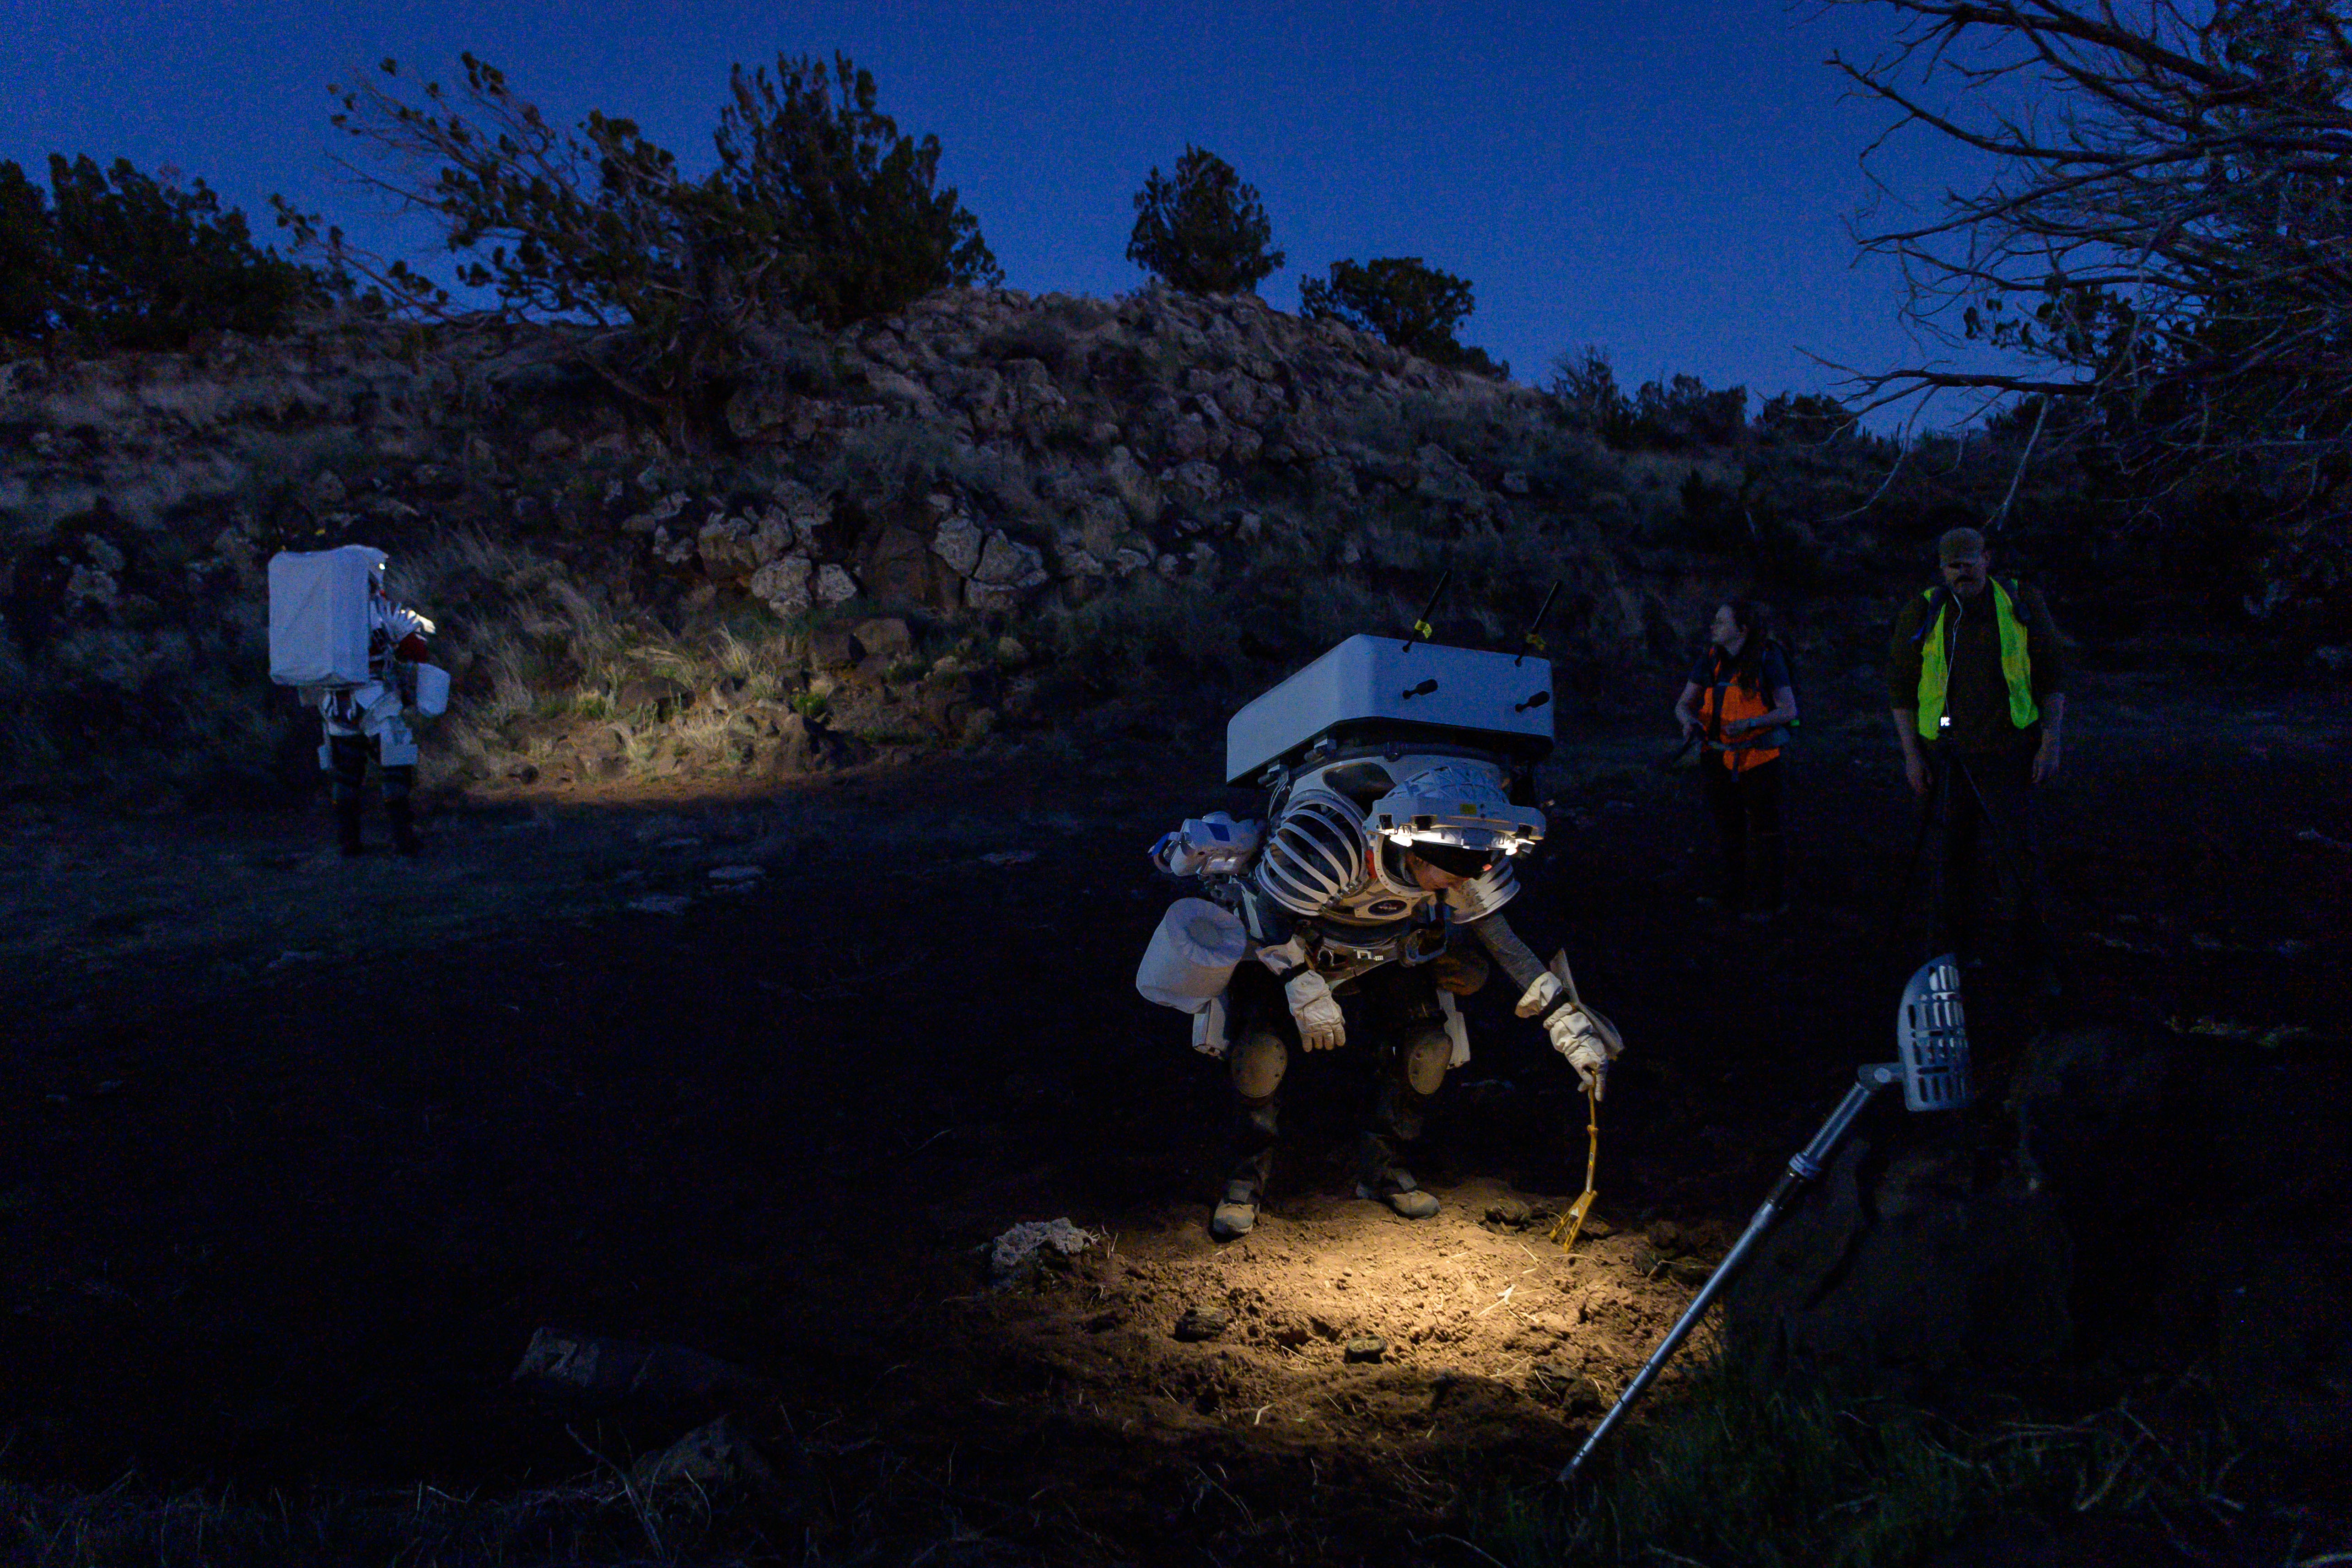 At night, an astronaut wearing white gear places a sample marker in the soil. The soil in front of her is lit up by the lights on the front of the open helmet. Two people in bright vests look on. In the background on the left, another astronaut wearing a similar outfit looks at another patch of soil.